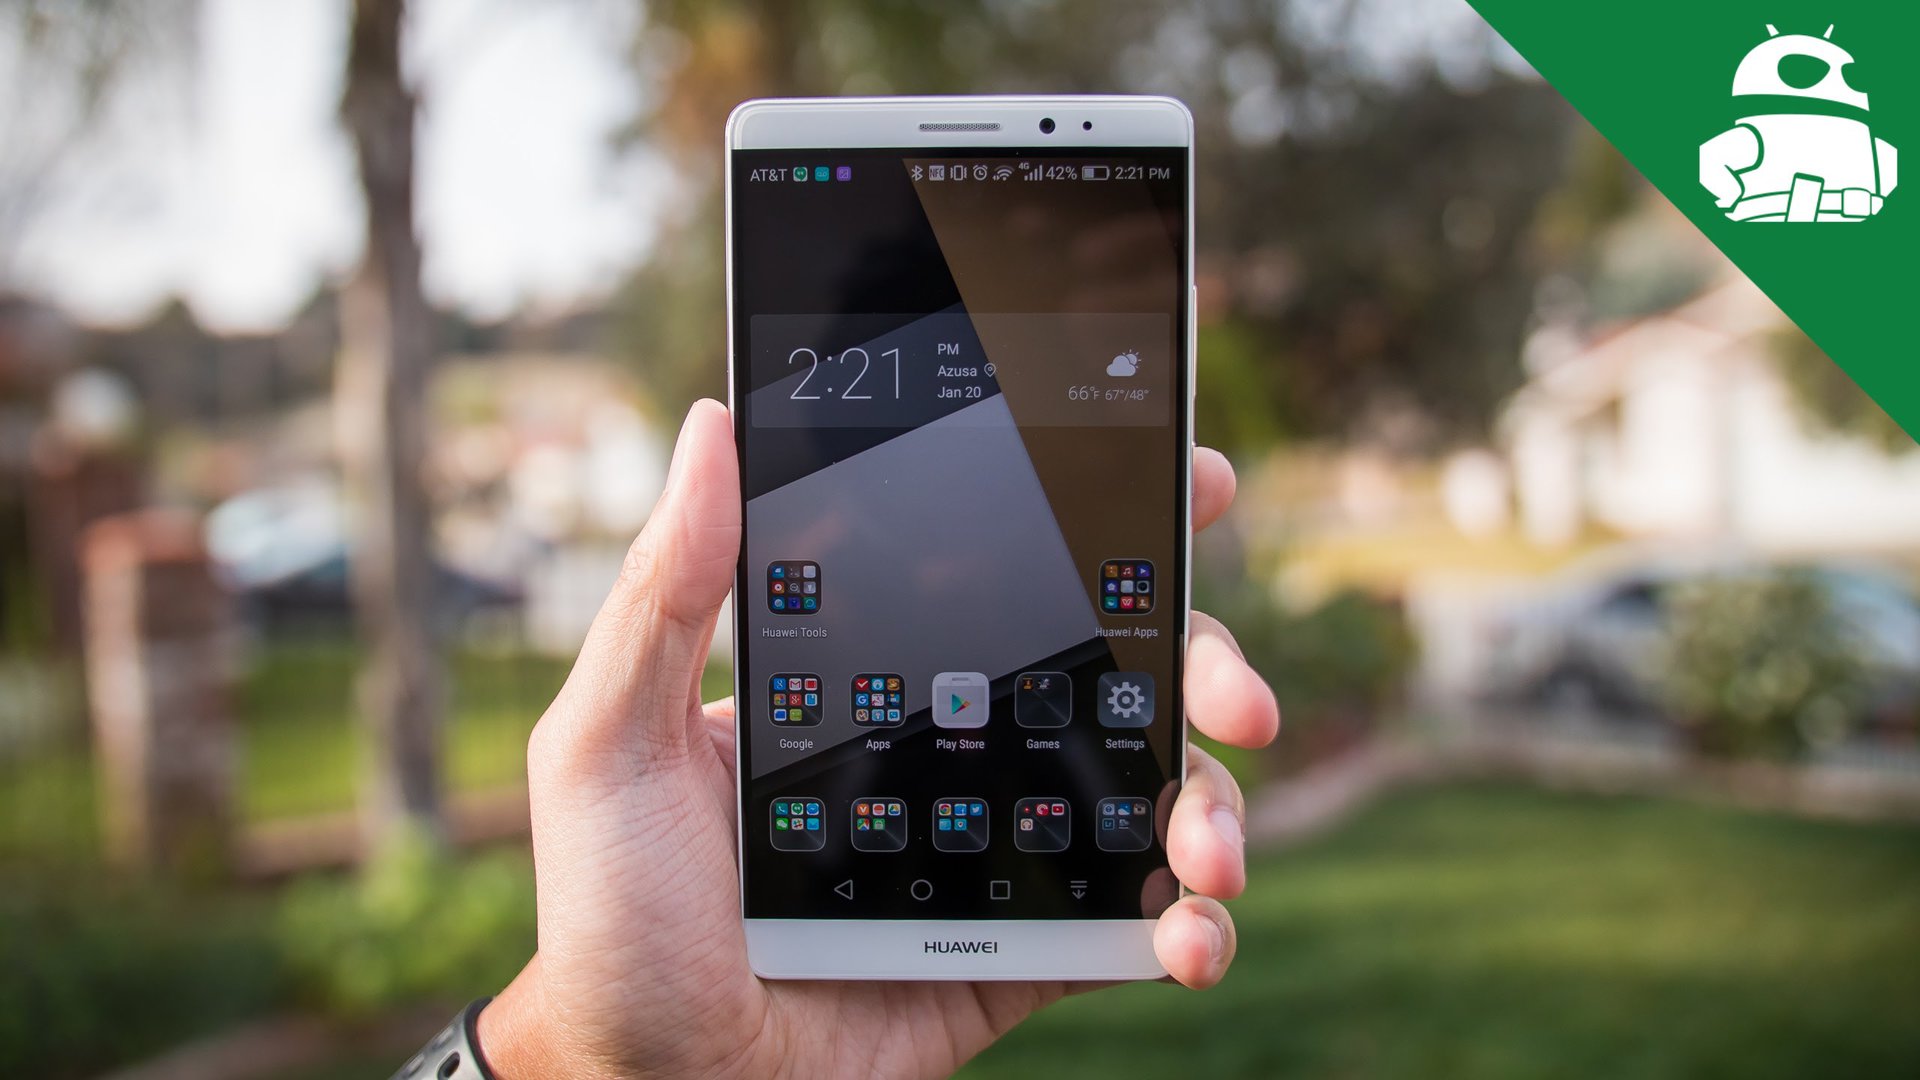 Huawei Mate 8 - Full phone specifications